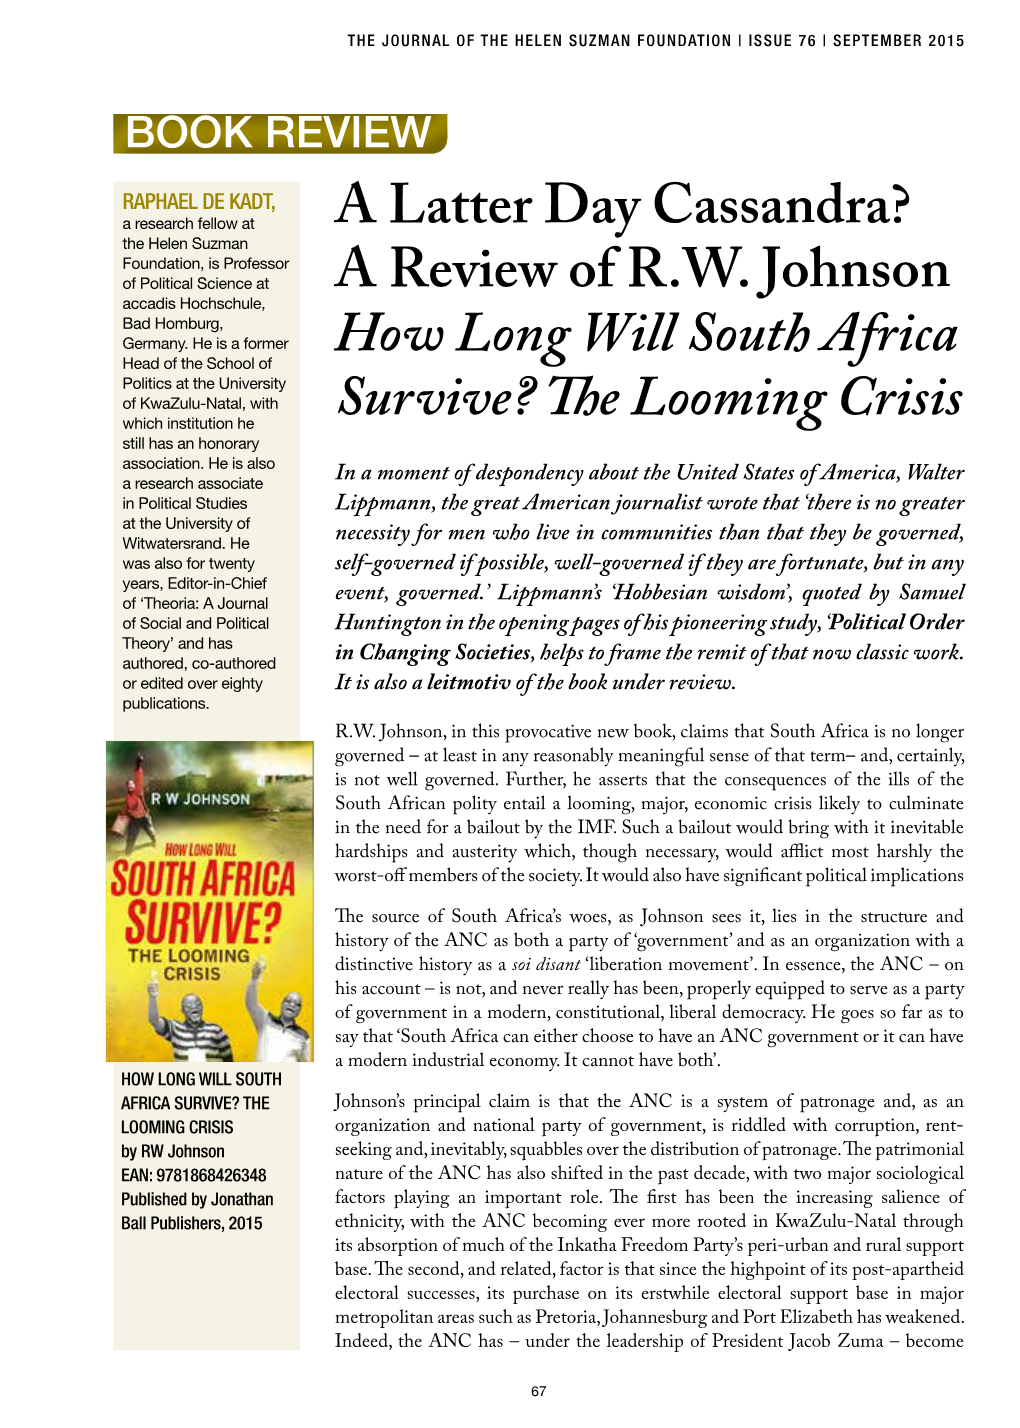 A Review of RW Johnson How Long Will South Africa Survive?